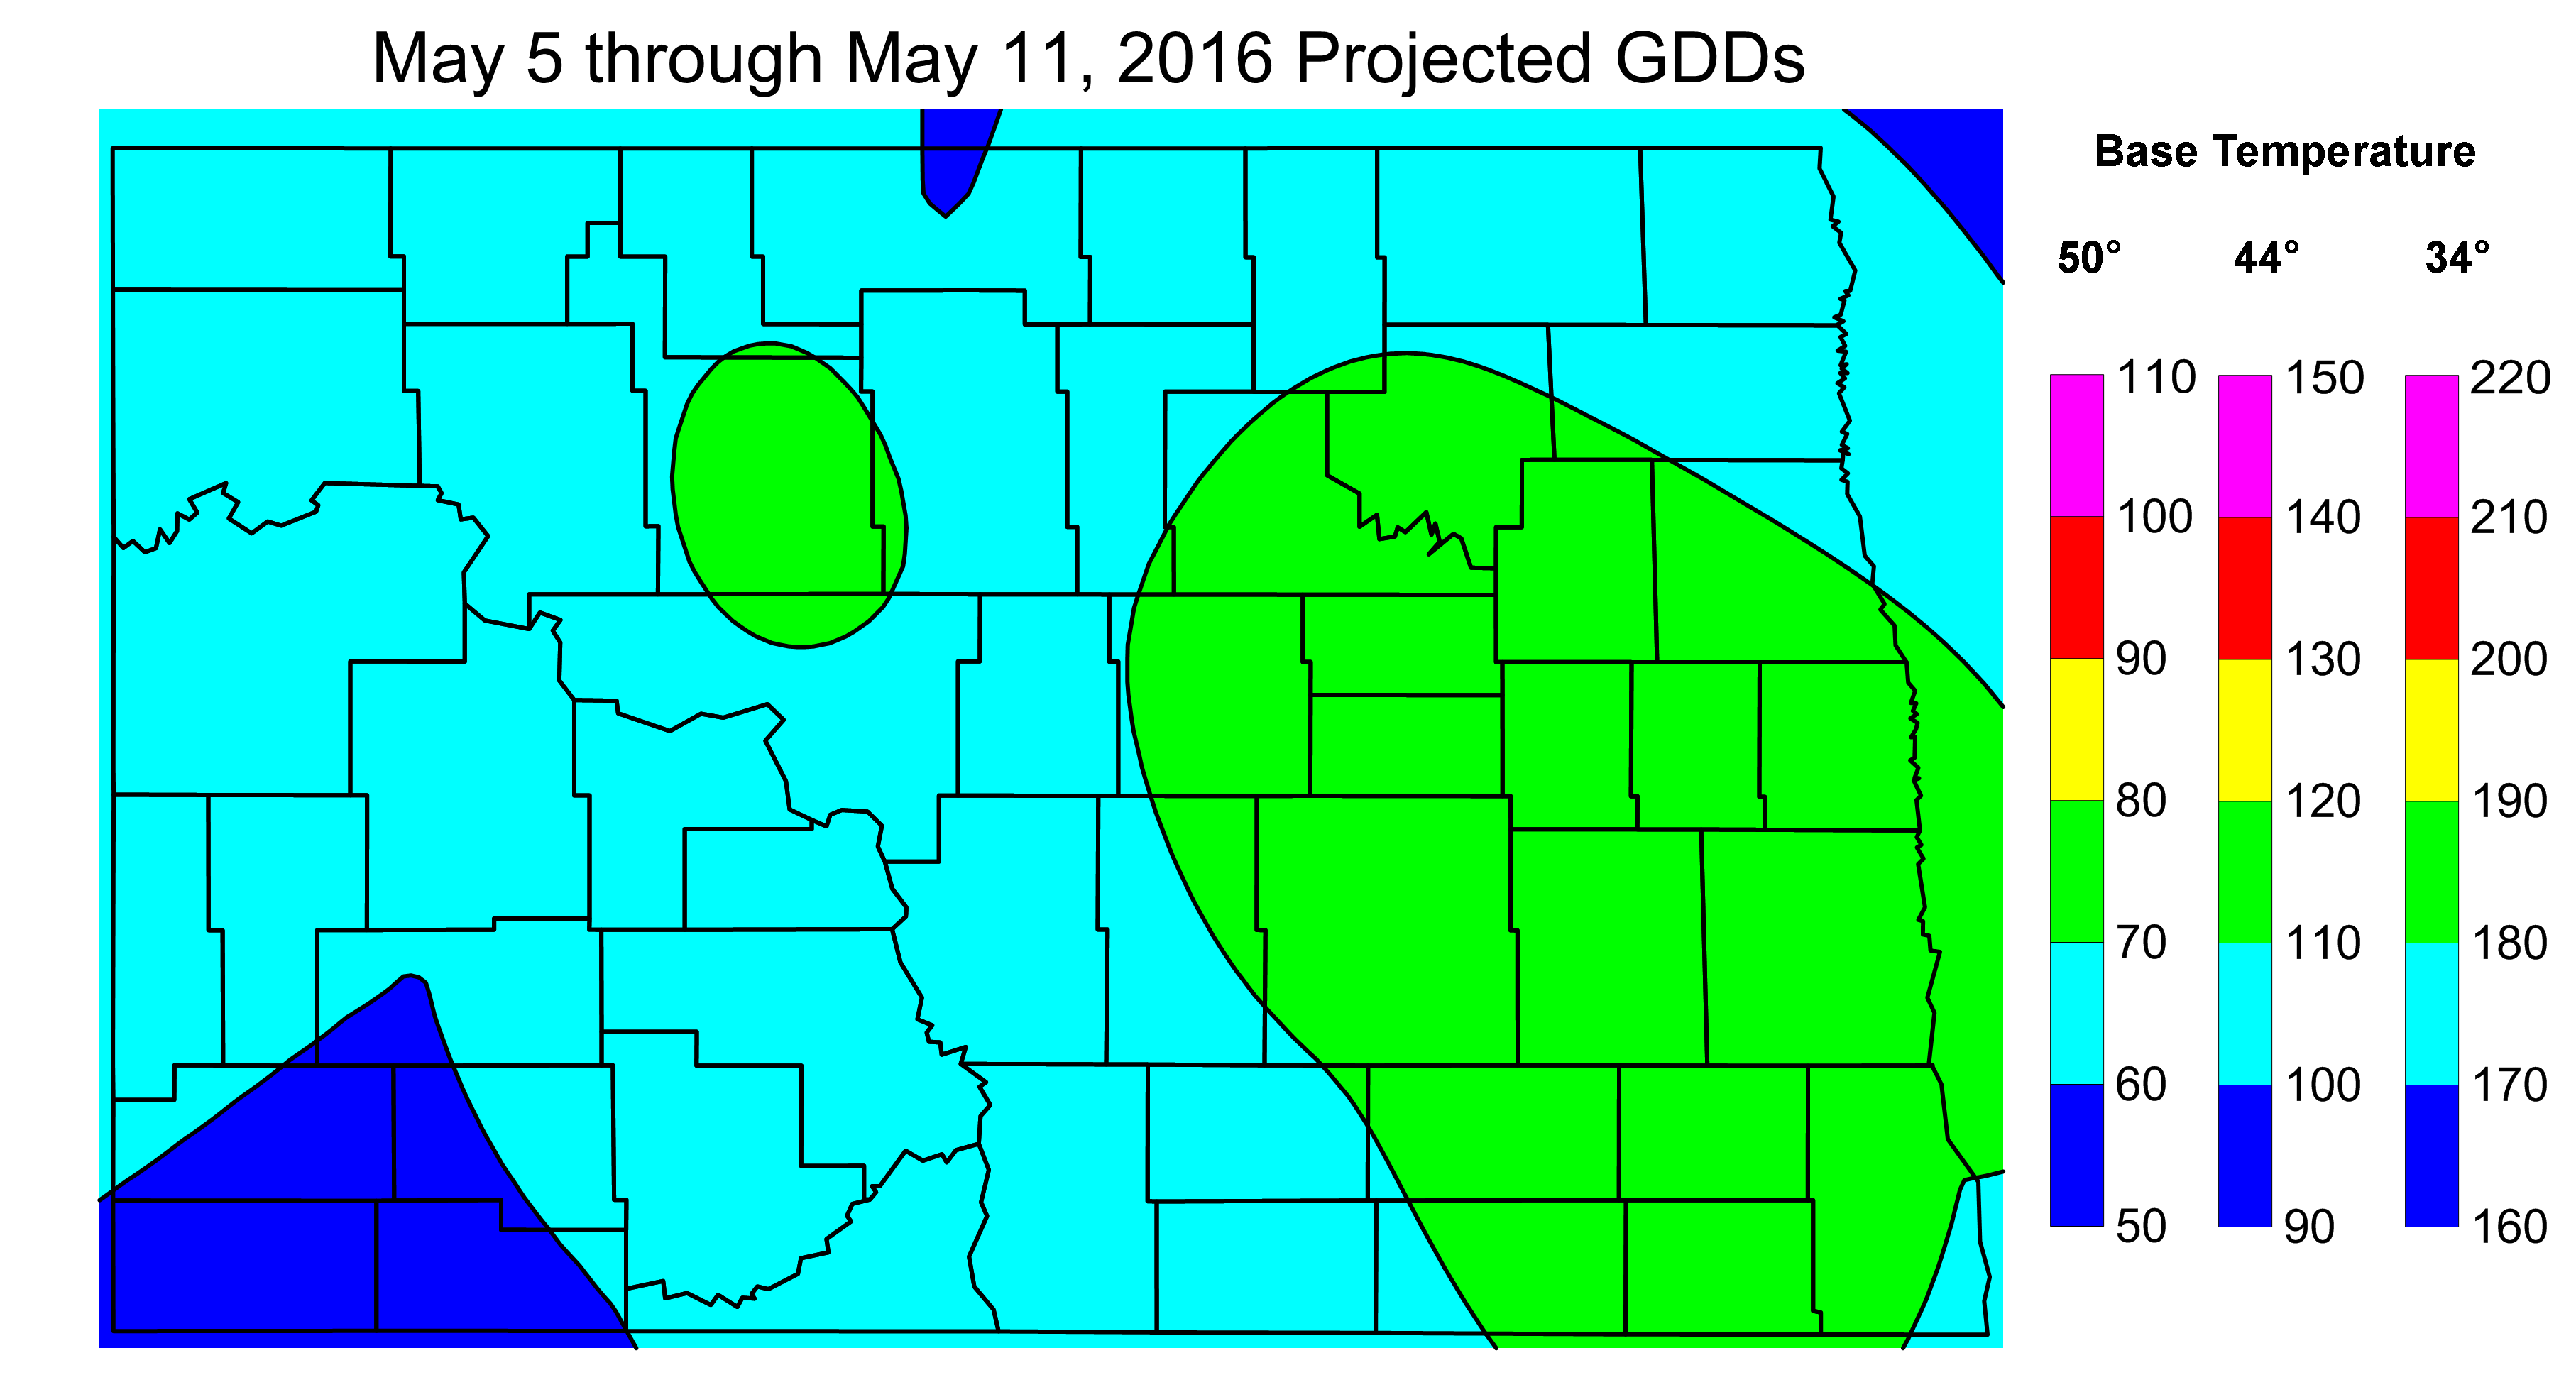 Figure 2. Projected Growing Degree Days from May 5 through May 11, 2016